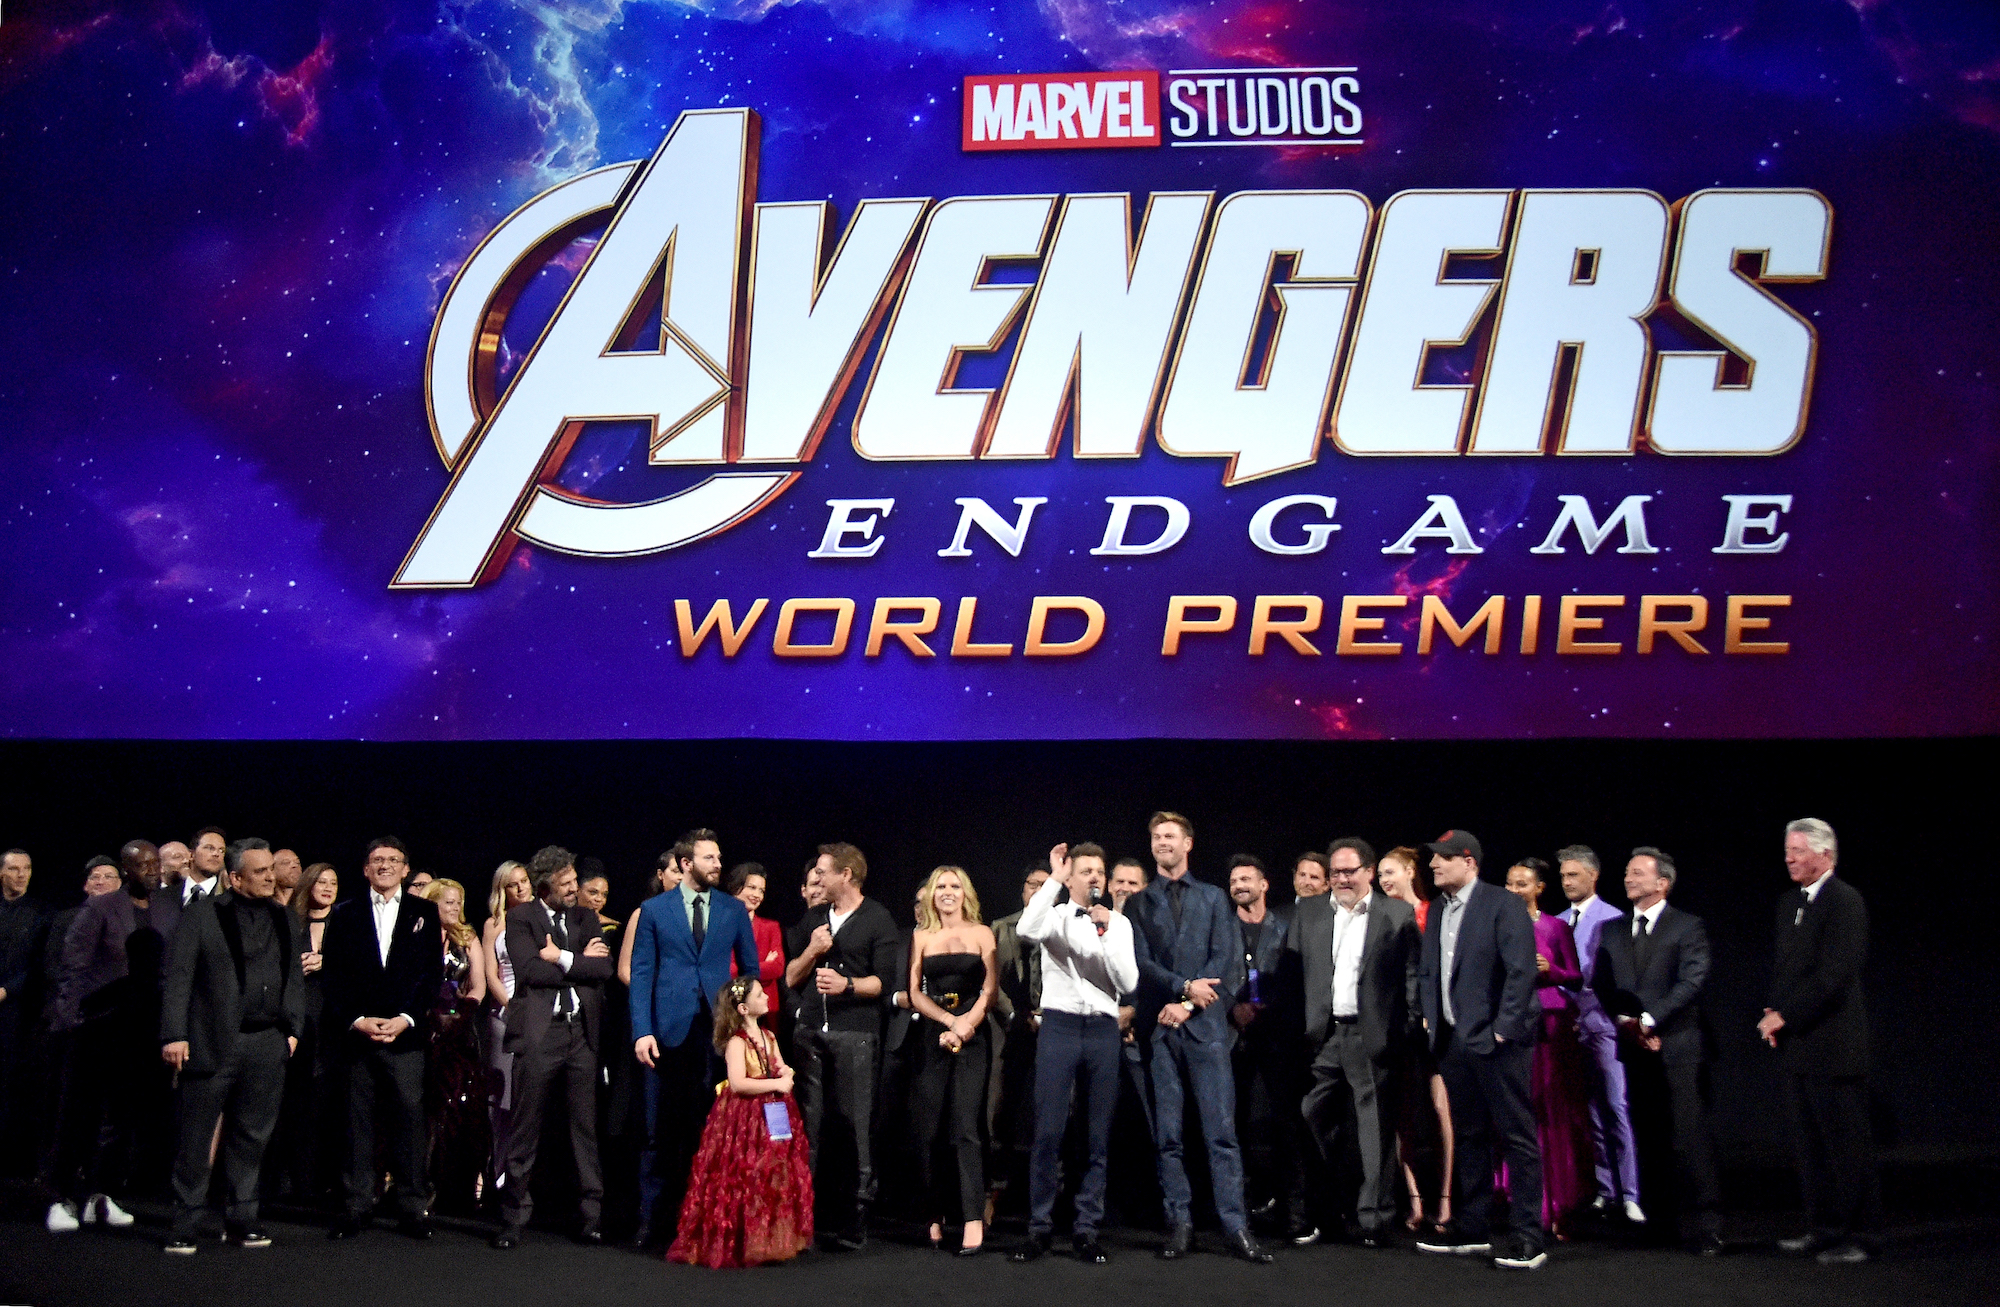 Endgame, The Clothes, Style, Outfits, Fashion, Looks